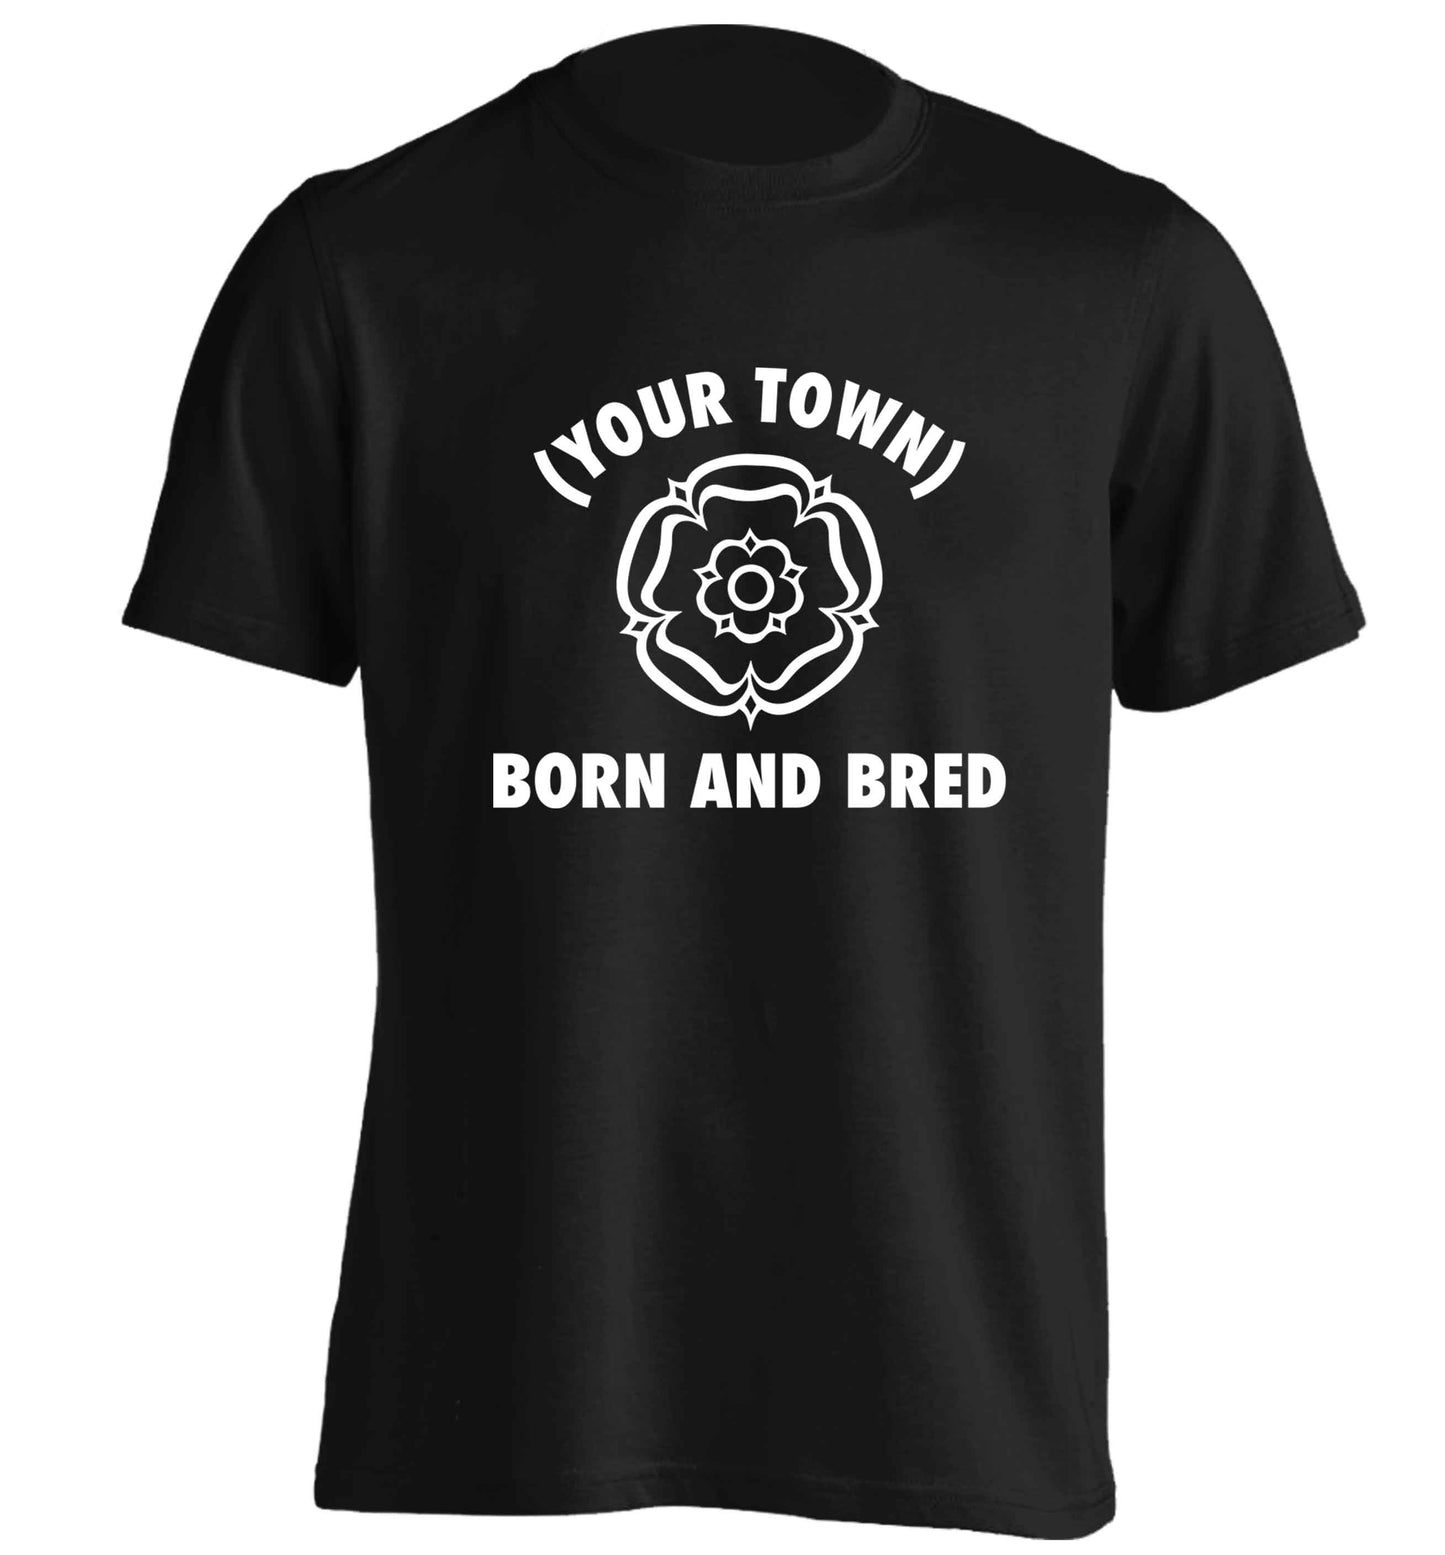 Personalised born and bred adults unisex black Tshirt 2XL